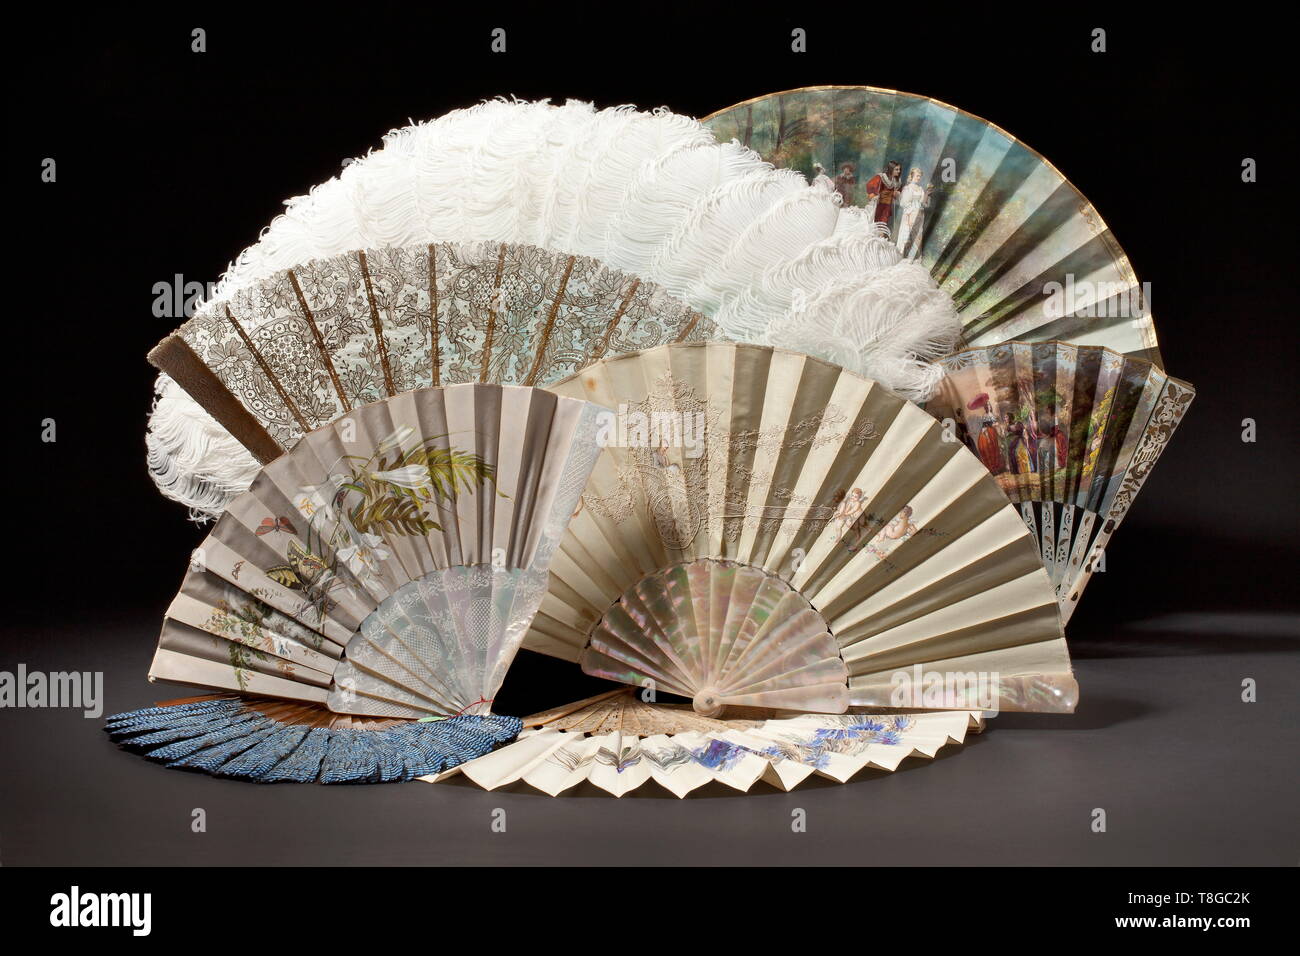 A German/French collection of 38 fans, 19th century Among them four feather fans, four brisé fans and 30 folding fans with frames made from wood, ivory, tortoiseshell, some partly gilt and from carved mother-of-pearl. The fan leaves painted with flowers and figures and made from silk, tulle, paper respectively lace. Three folding fans signed 'TW' (for Therese Weber) and manufacturer 'Thierry München', another exemplar signed 'Alexandre', one wooden fan with flower-shaped inscription 'VERA'. The feather fans with Eurasian jay and white ostrich fea, Additional-Rights-Clearance-Info-Not-Available Stock Photo